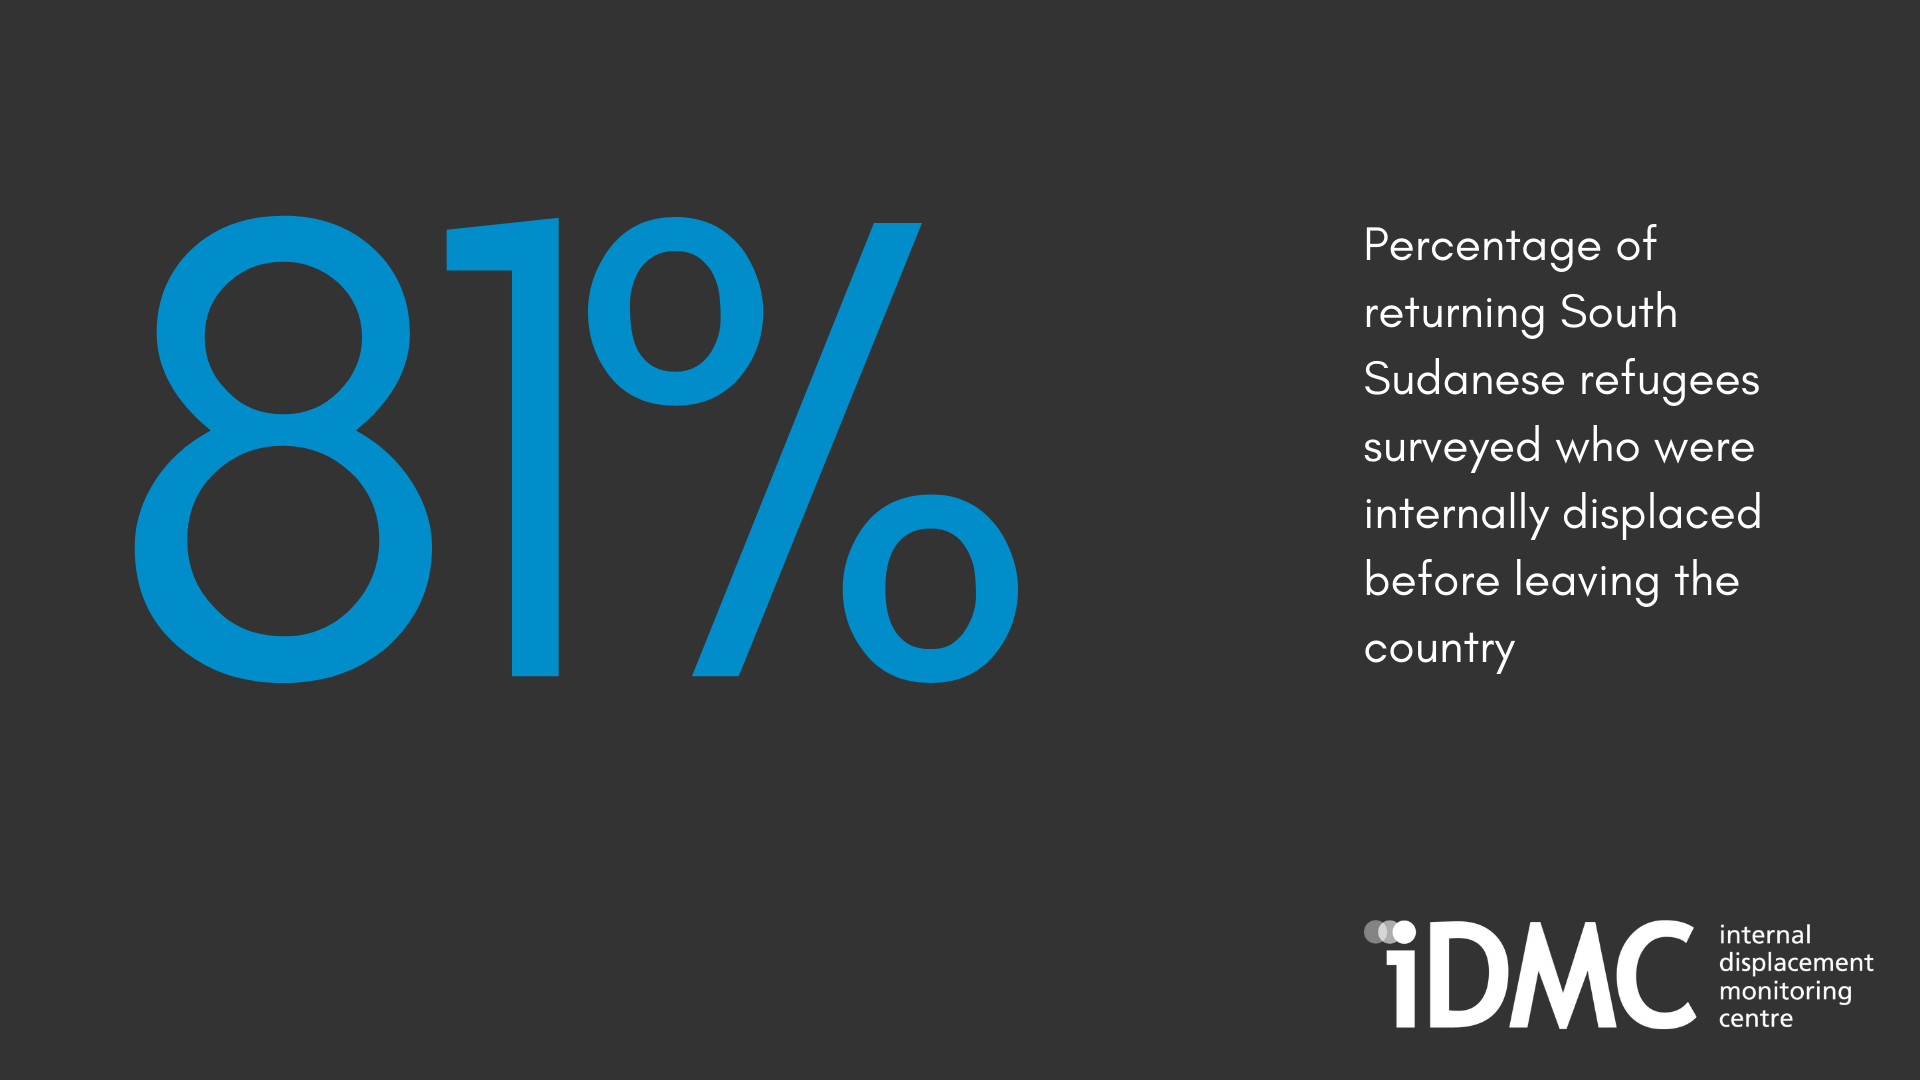 Statistic card: 81% of South Sudanese refugees surveyed were internally displaced before leaving the country